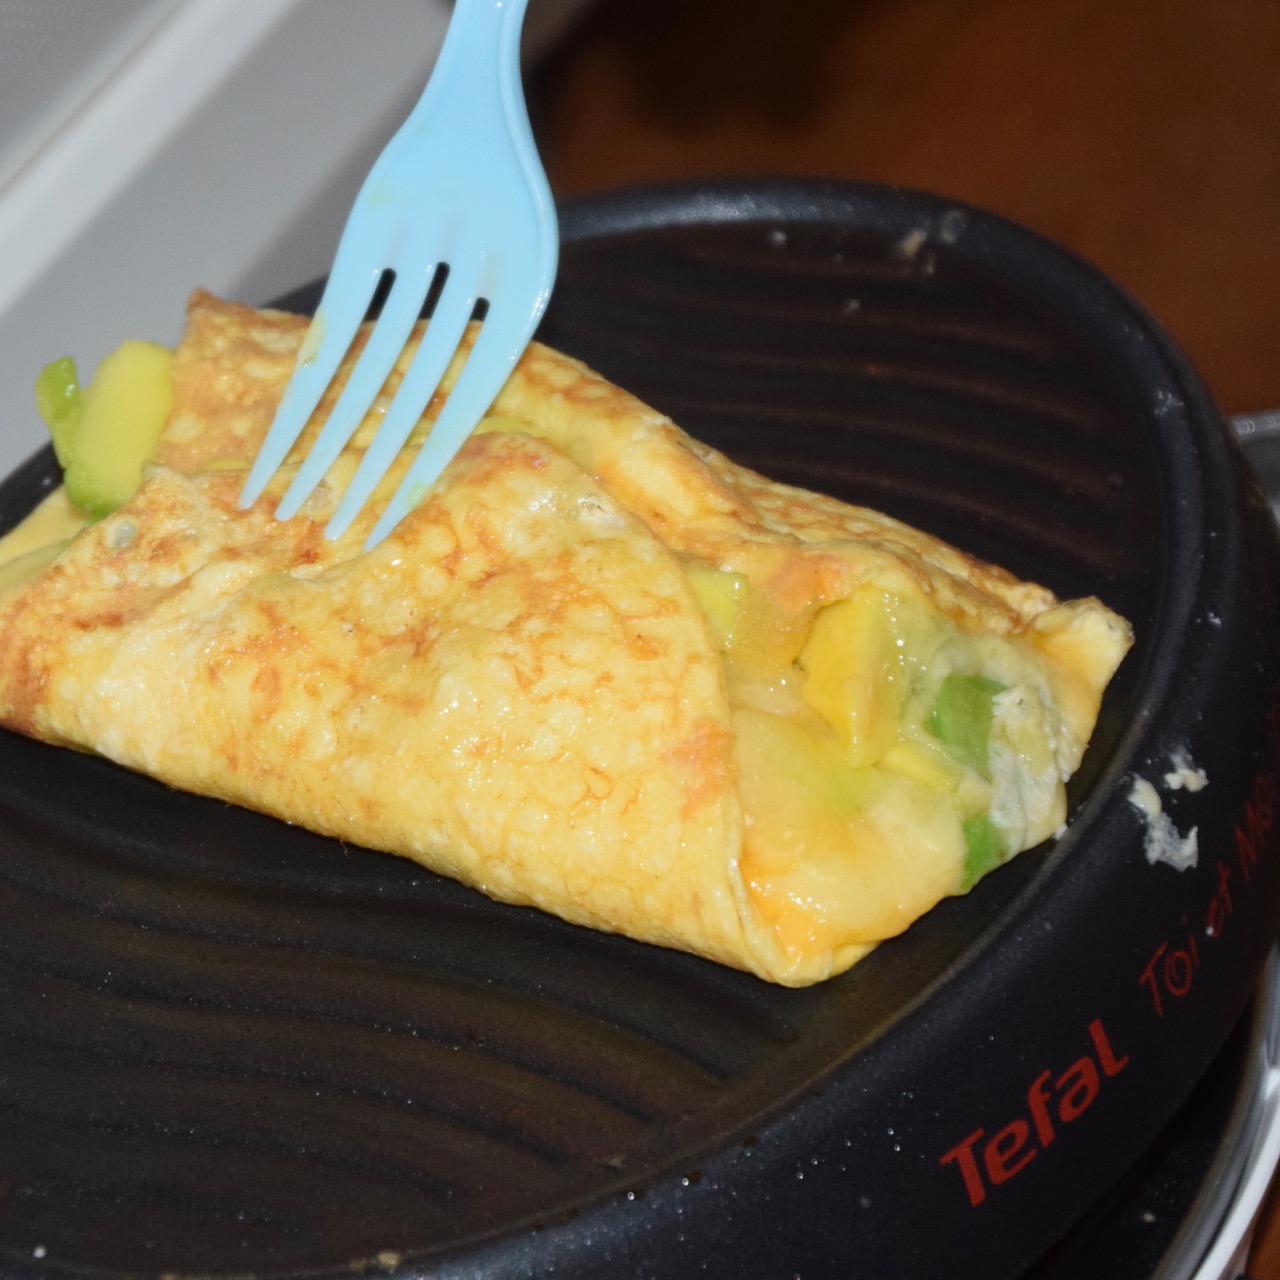 Mr. MacGyver Creates an Omelette!